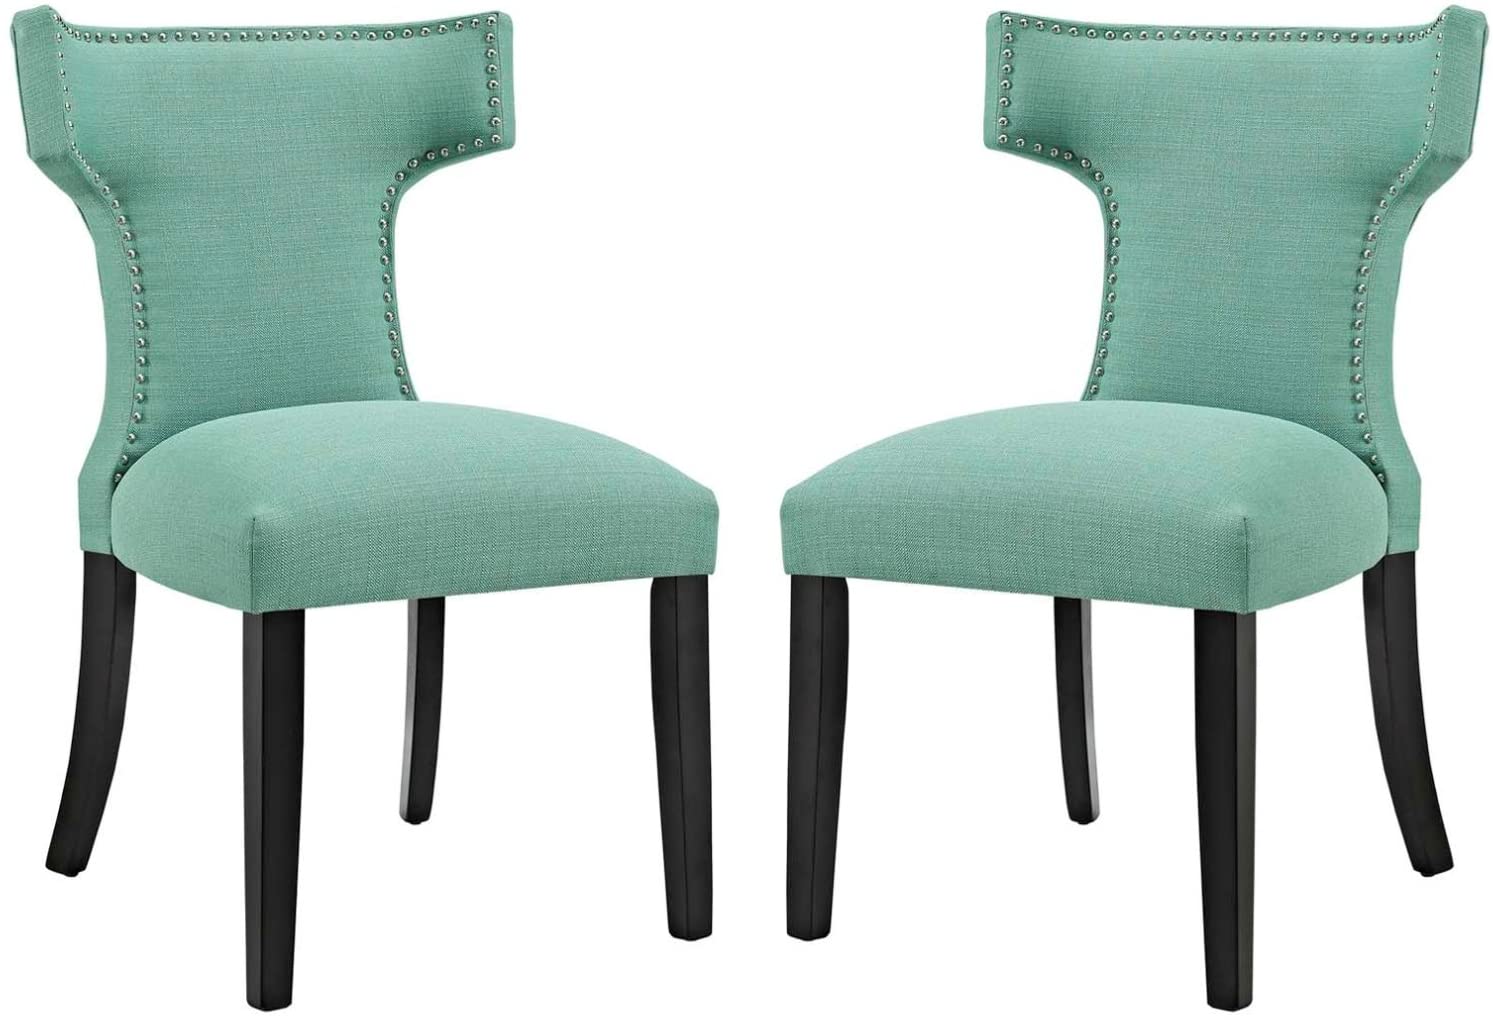 B076DM3MSS Modern Contemporary Urban Design Kitchen Room Dining Side Chair (Set of Two), Blue, Fabric